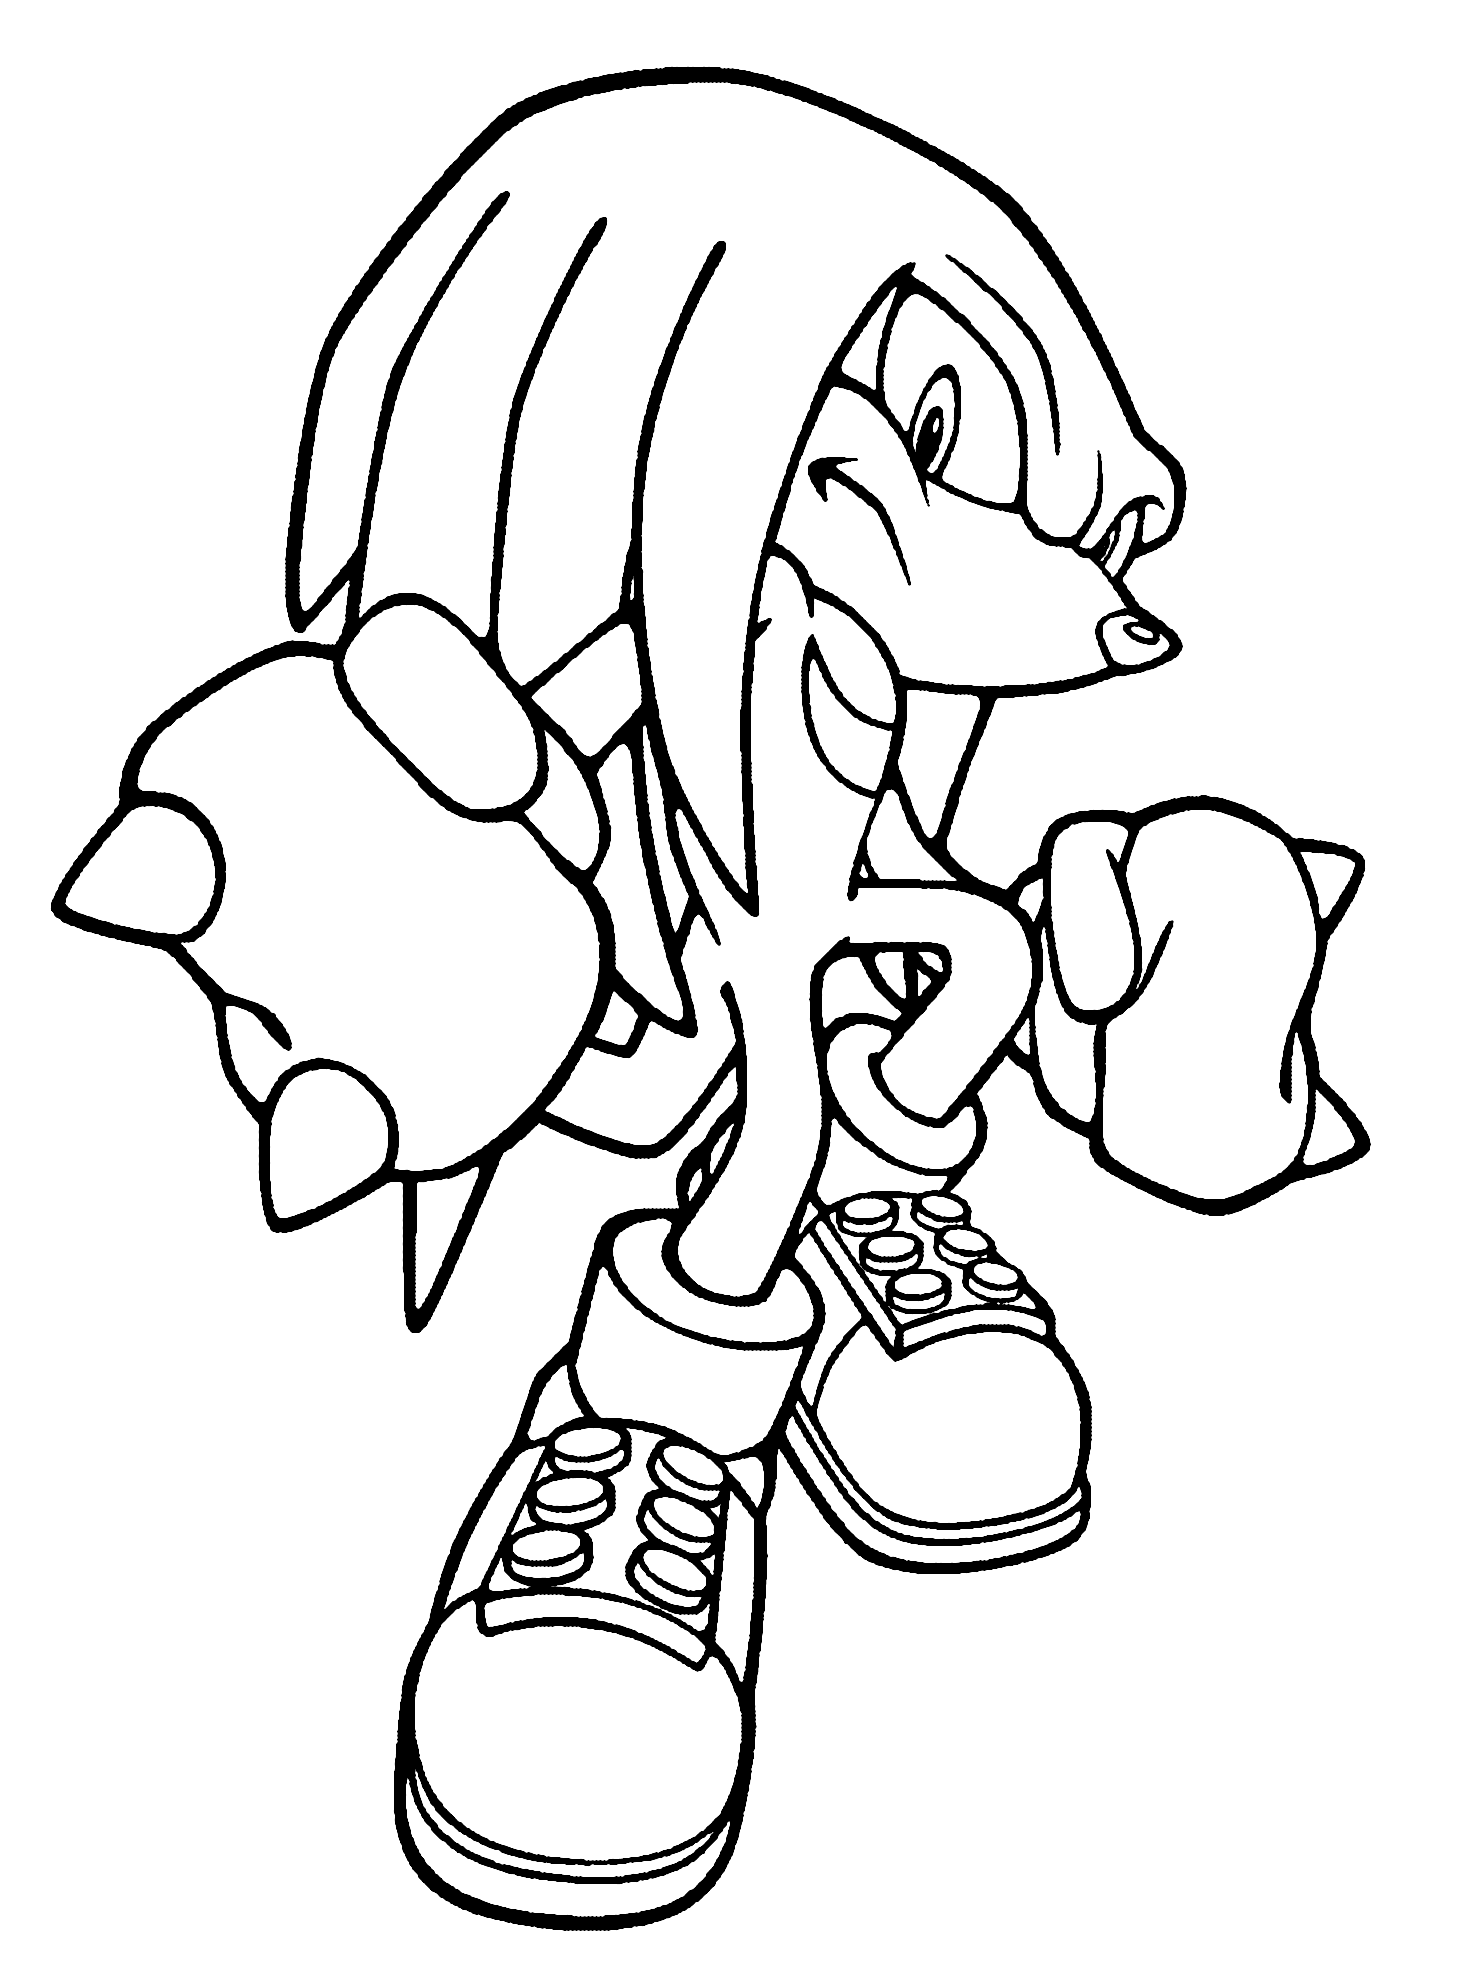 In this coloring page, Knuckles the Echidna is throwing a punch right at you! Color his spiked fist red as he rears back, ready to knock out whoever is trying to steal the Master Emerald. - SheetalColor.com